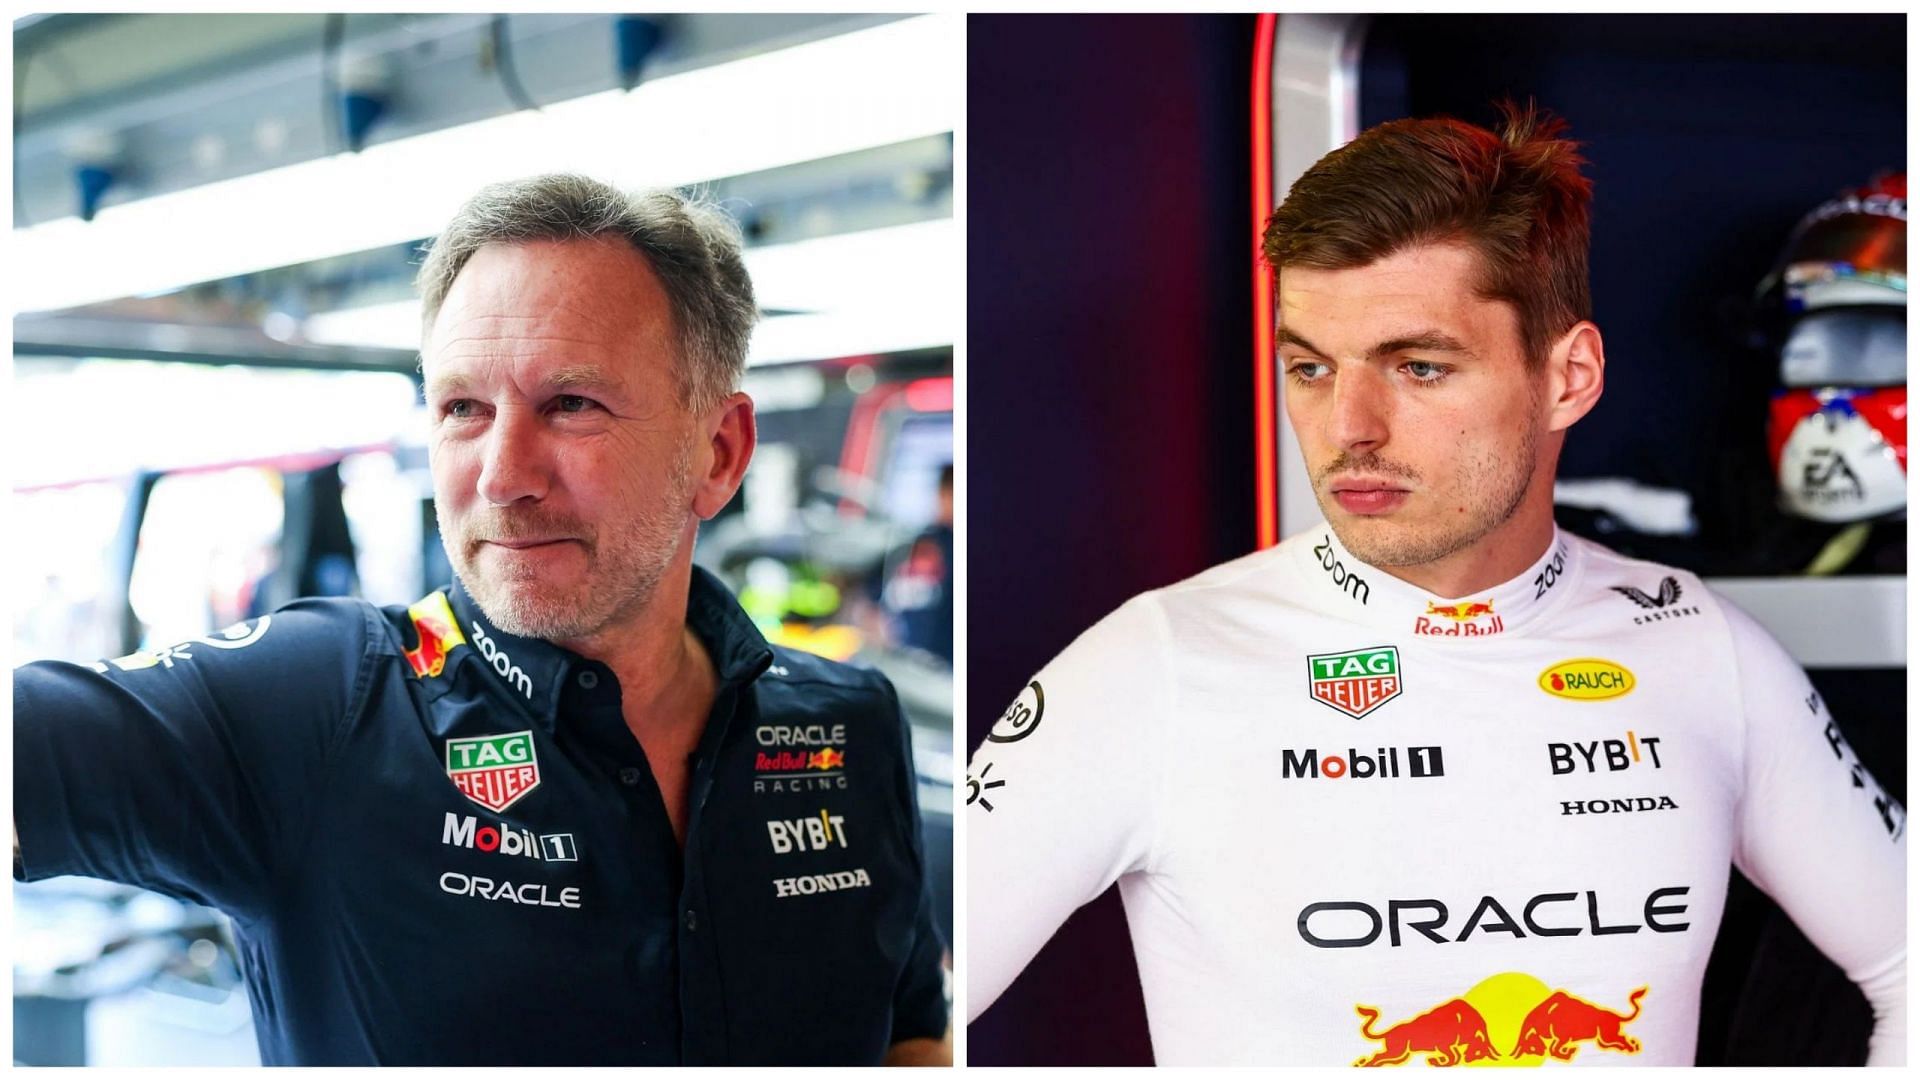 Christian Horner reflects on disappointing session at Monaco as Max Verstappen misses pole position 